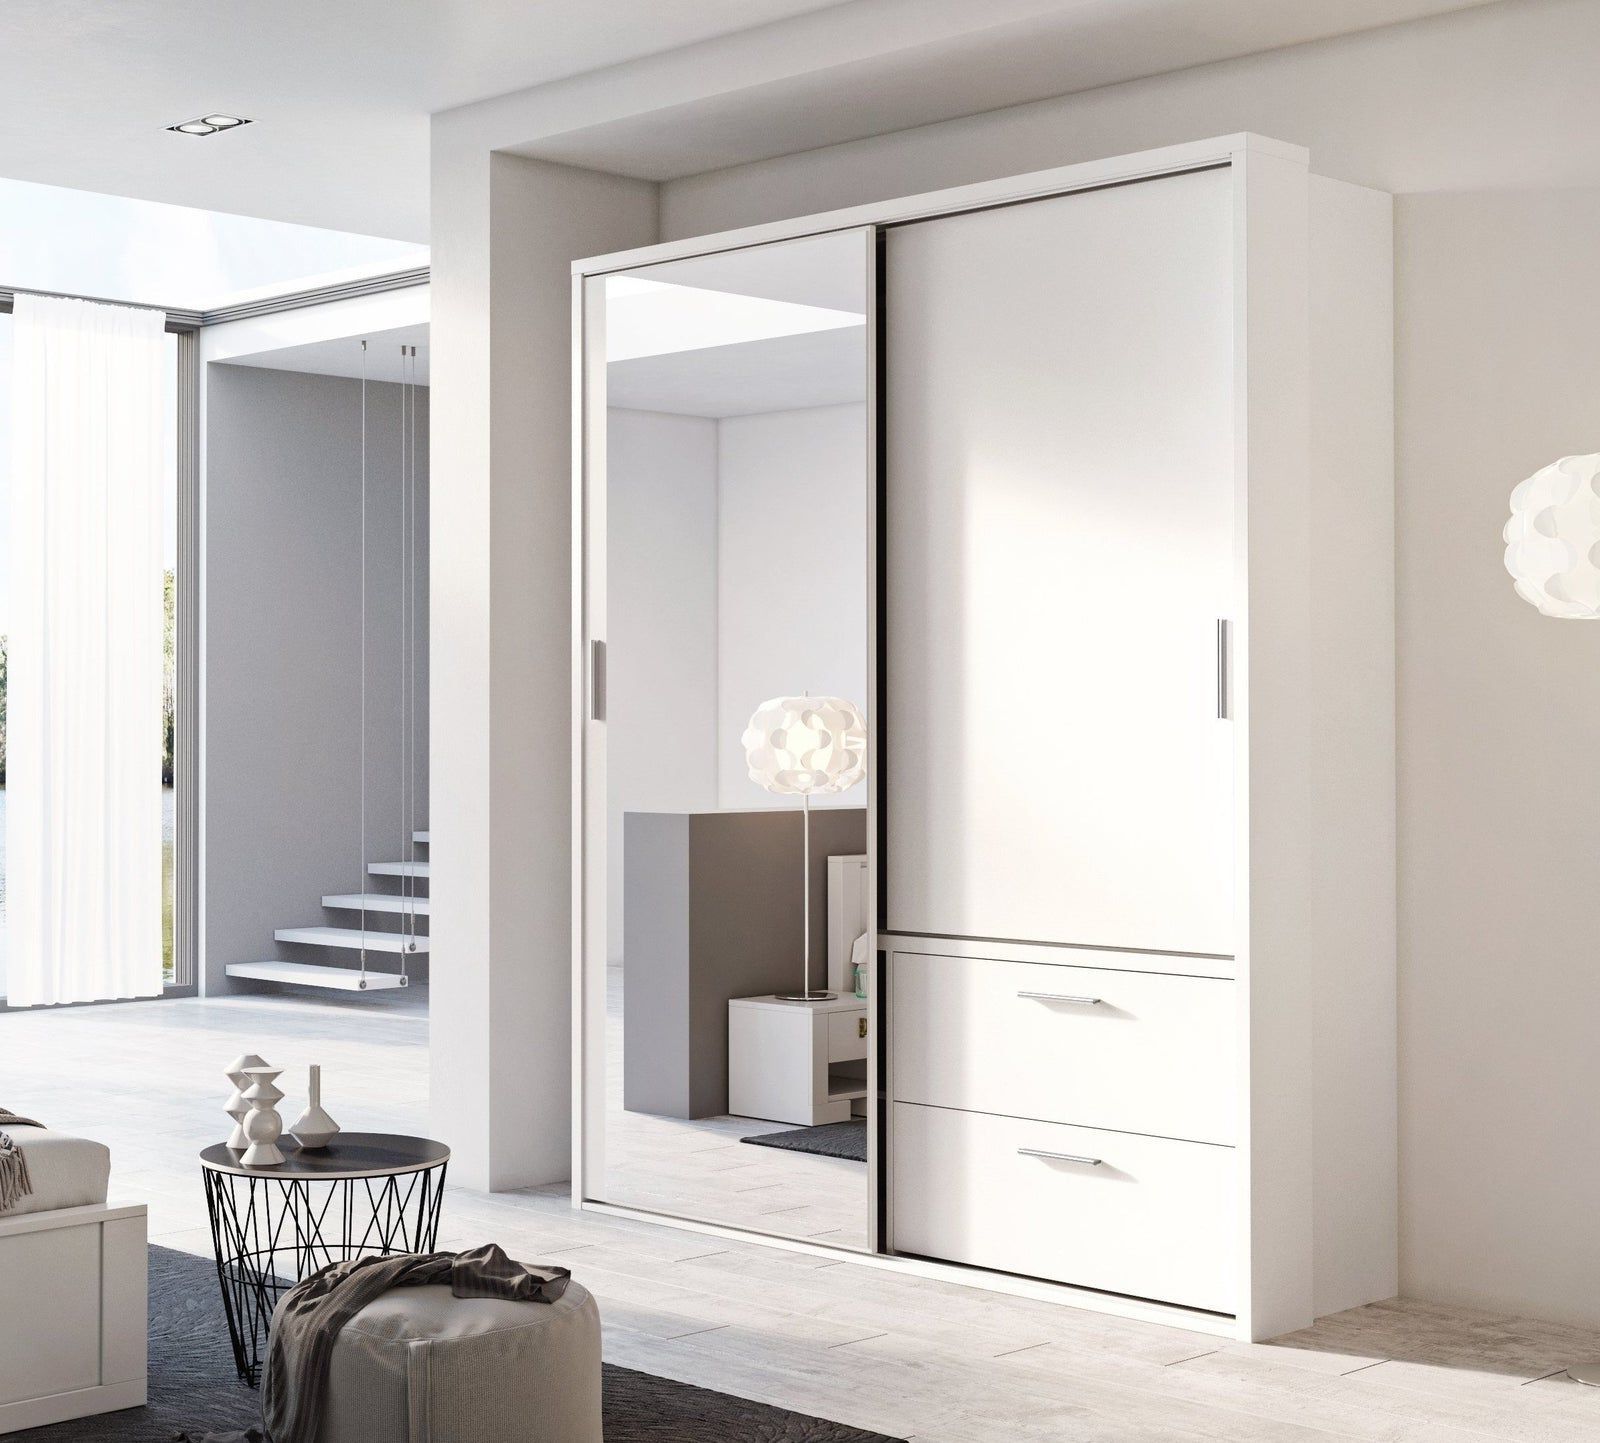 Vision Sliding Wardrobe With Drawers In White | 2 Door – 180cm Inside White 2 Door Wardrobes With Drawers (Gallery 15 of 20)